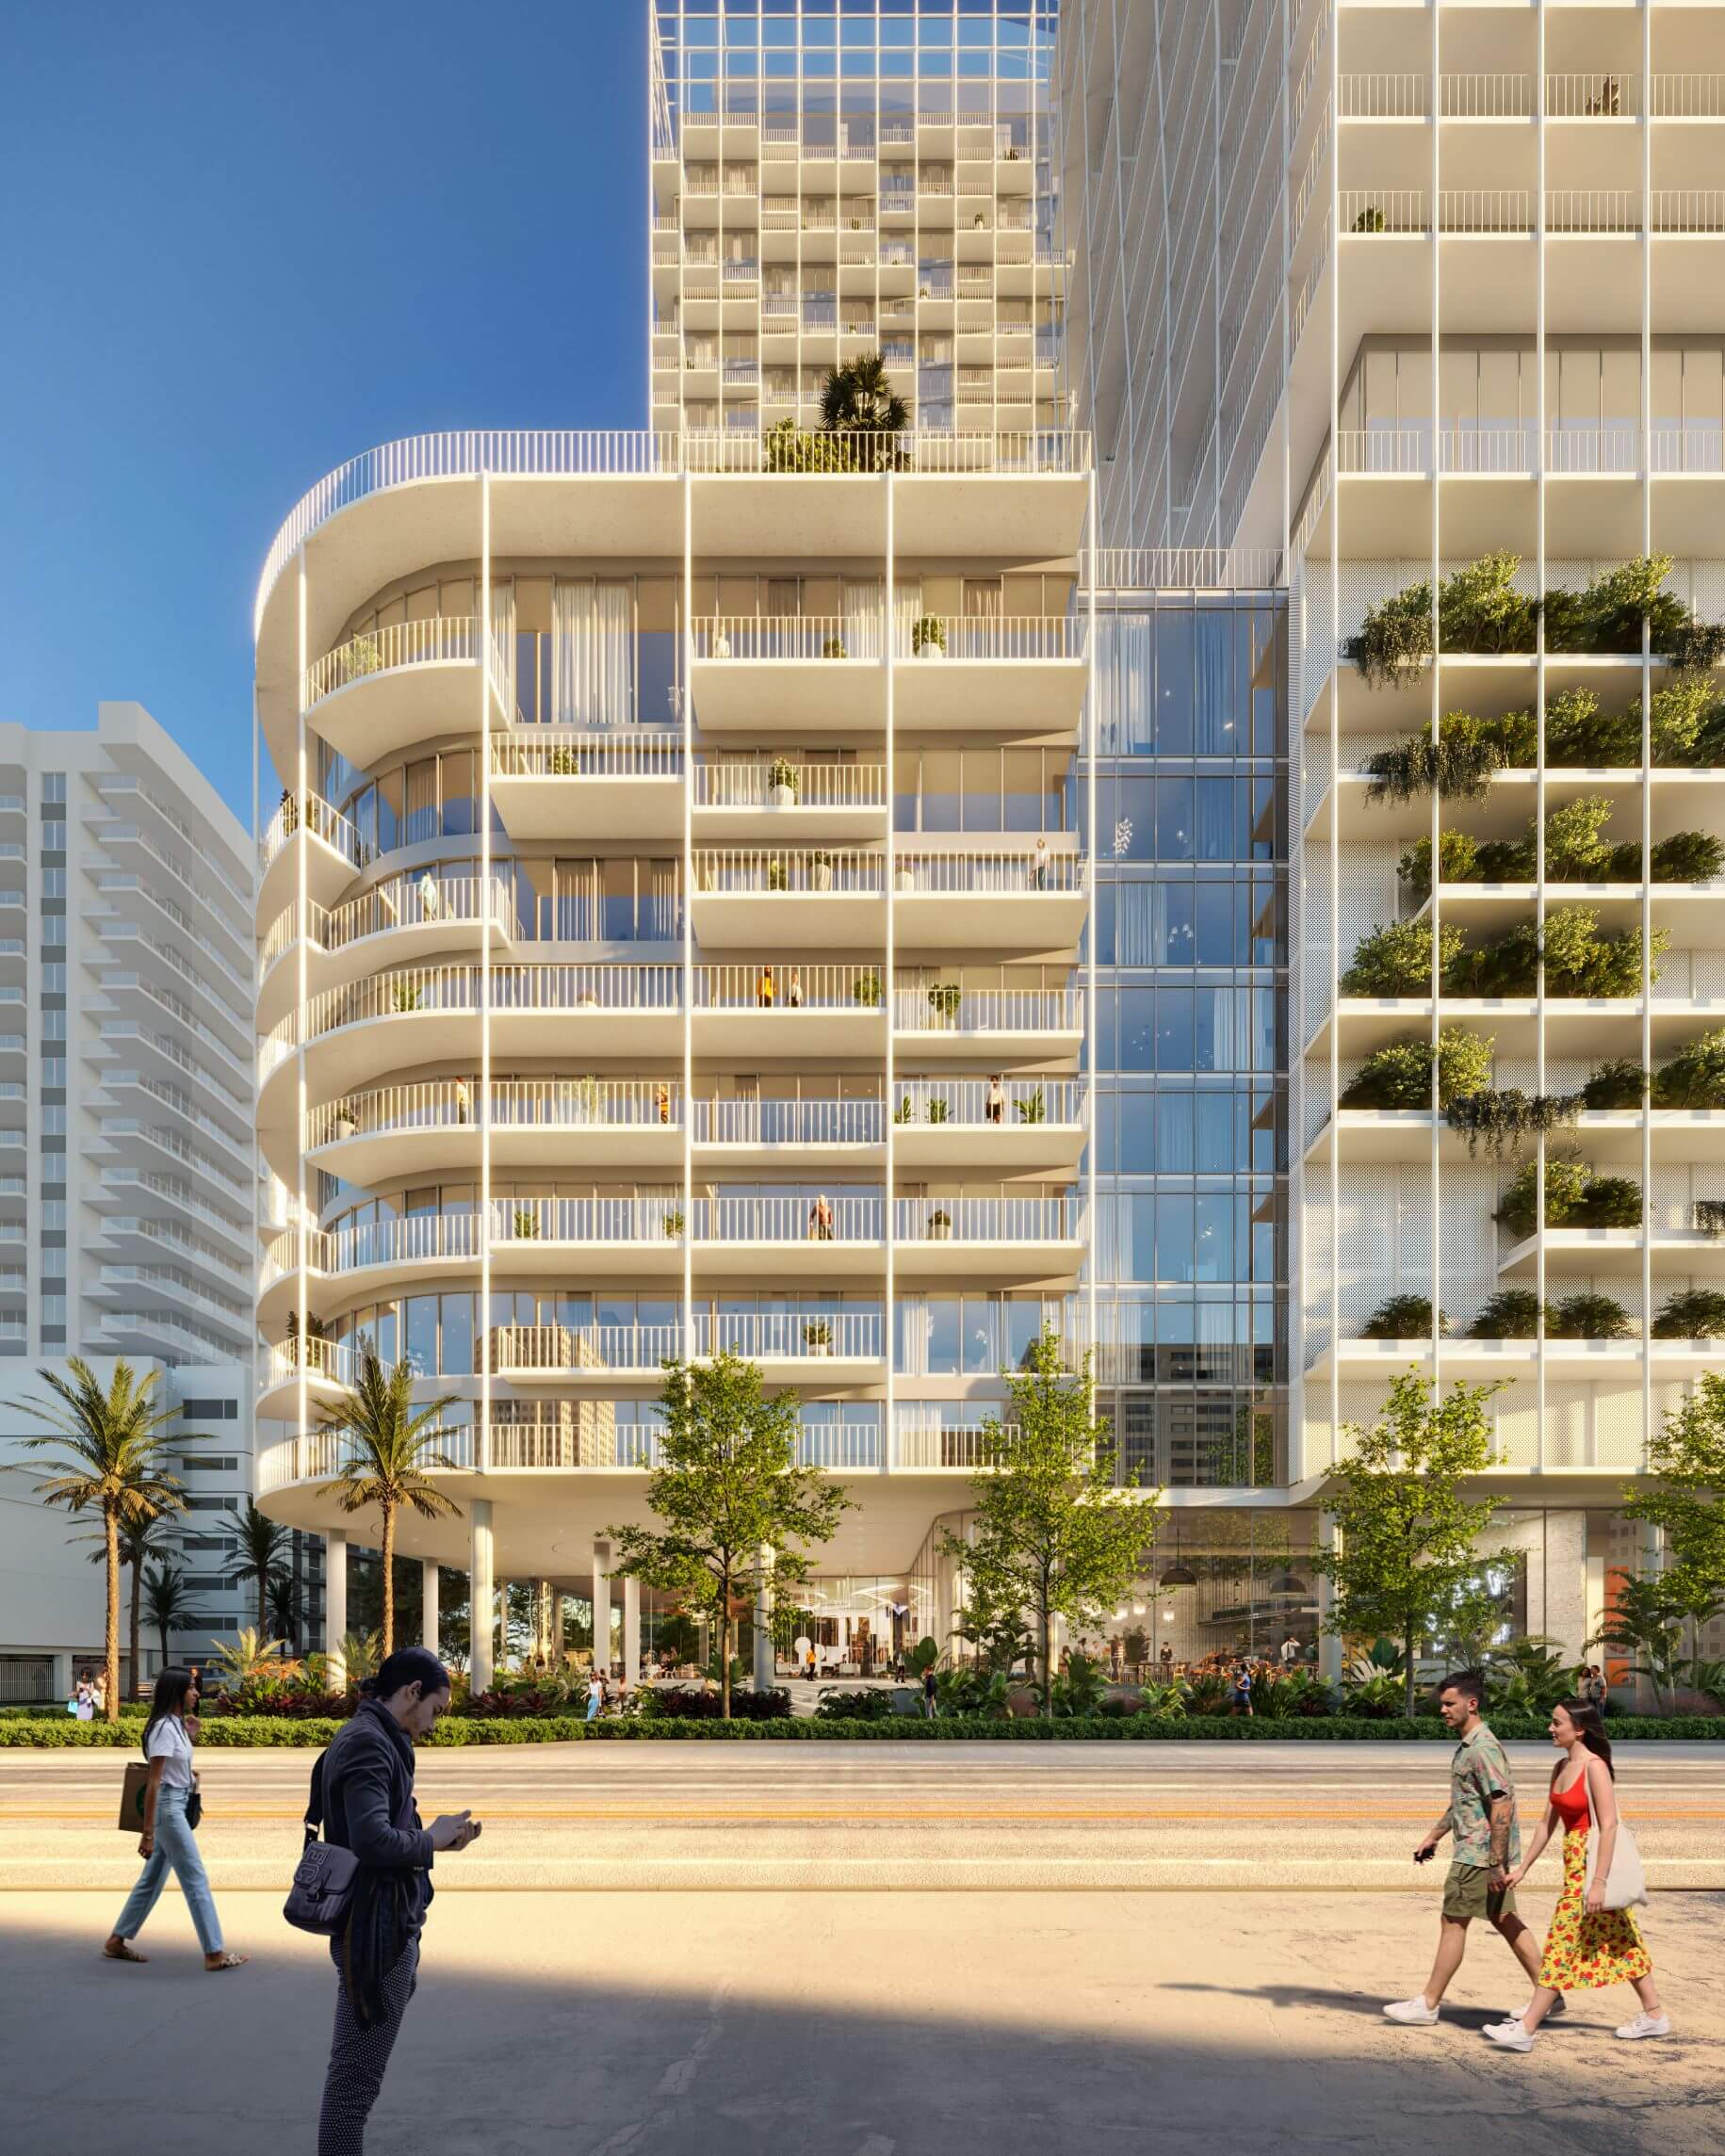 rendering of people walking past a large apartment development